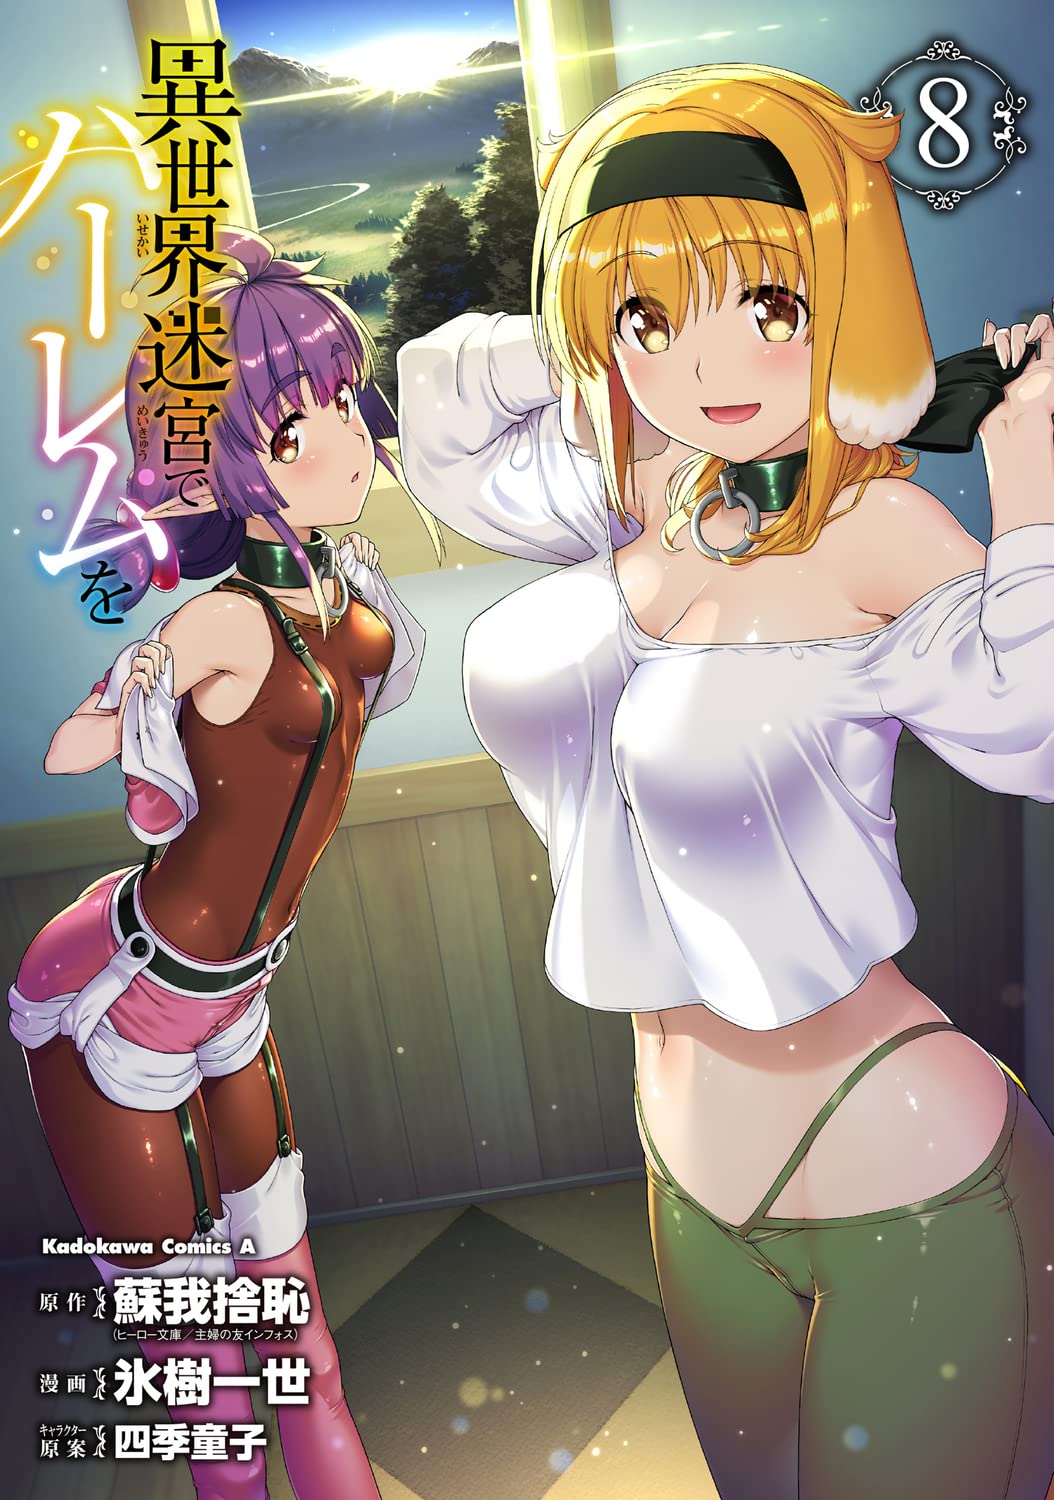 Isekai Meikyuu de Harem wo - Harem in the Labyrinth of Another